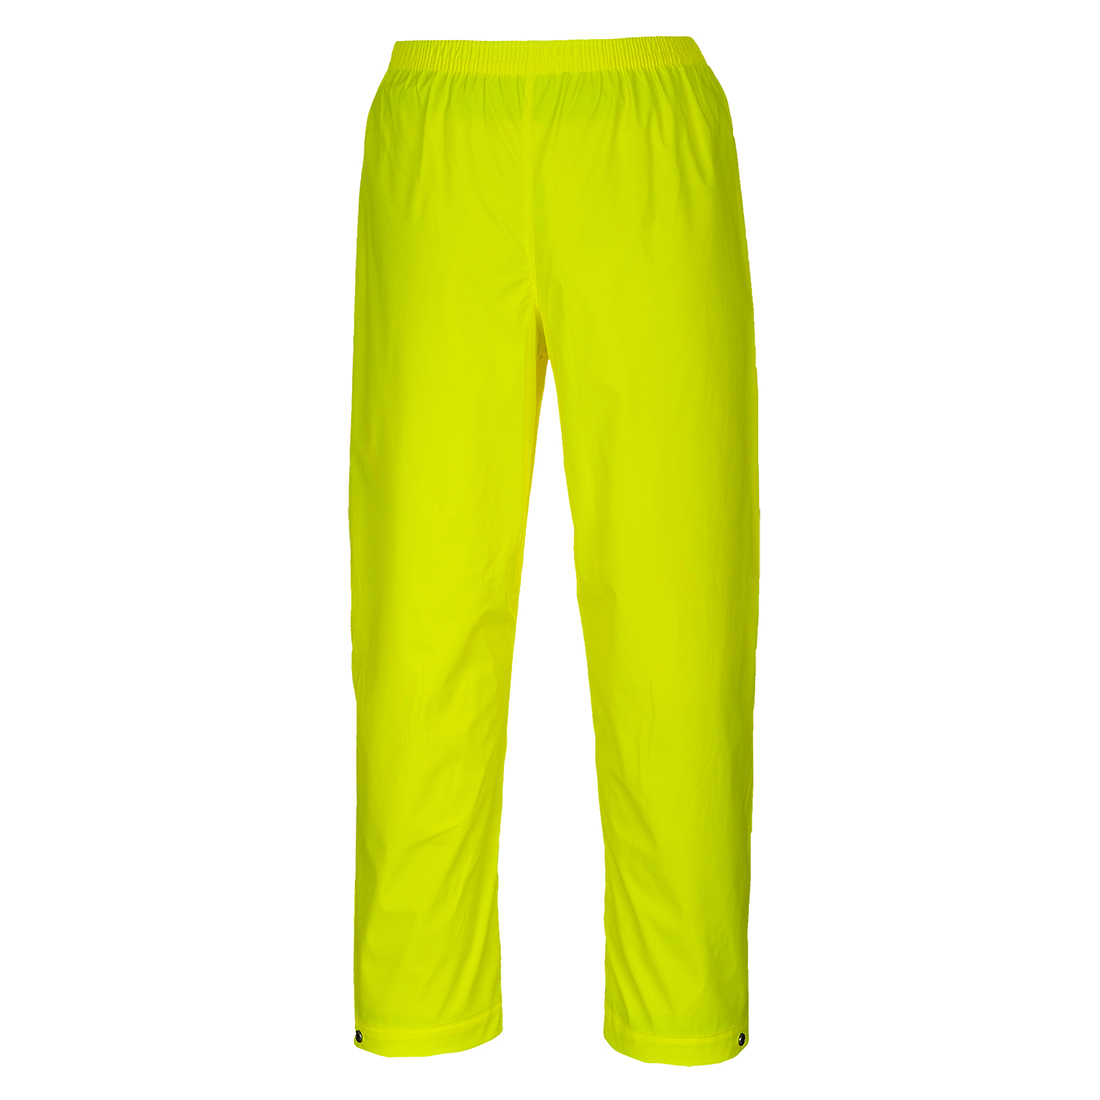 Sealtex Trousers, Yellow     Size Large R/Fit